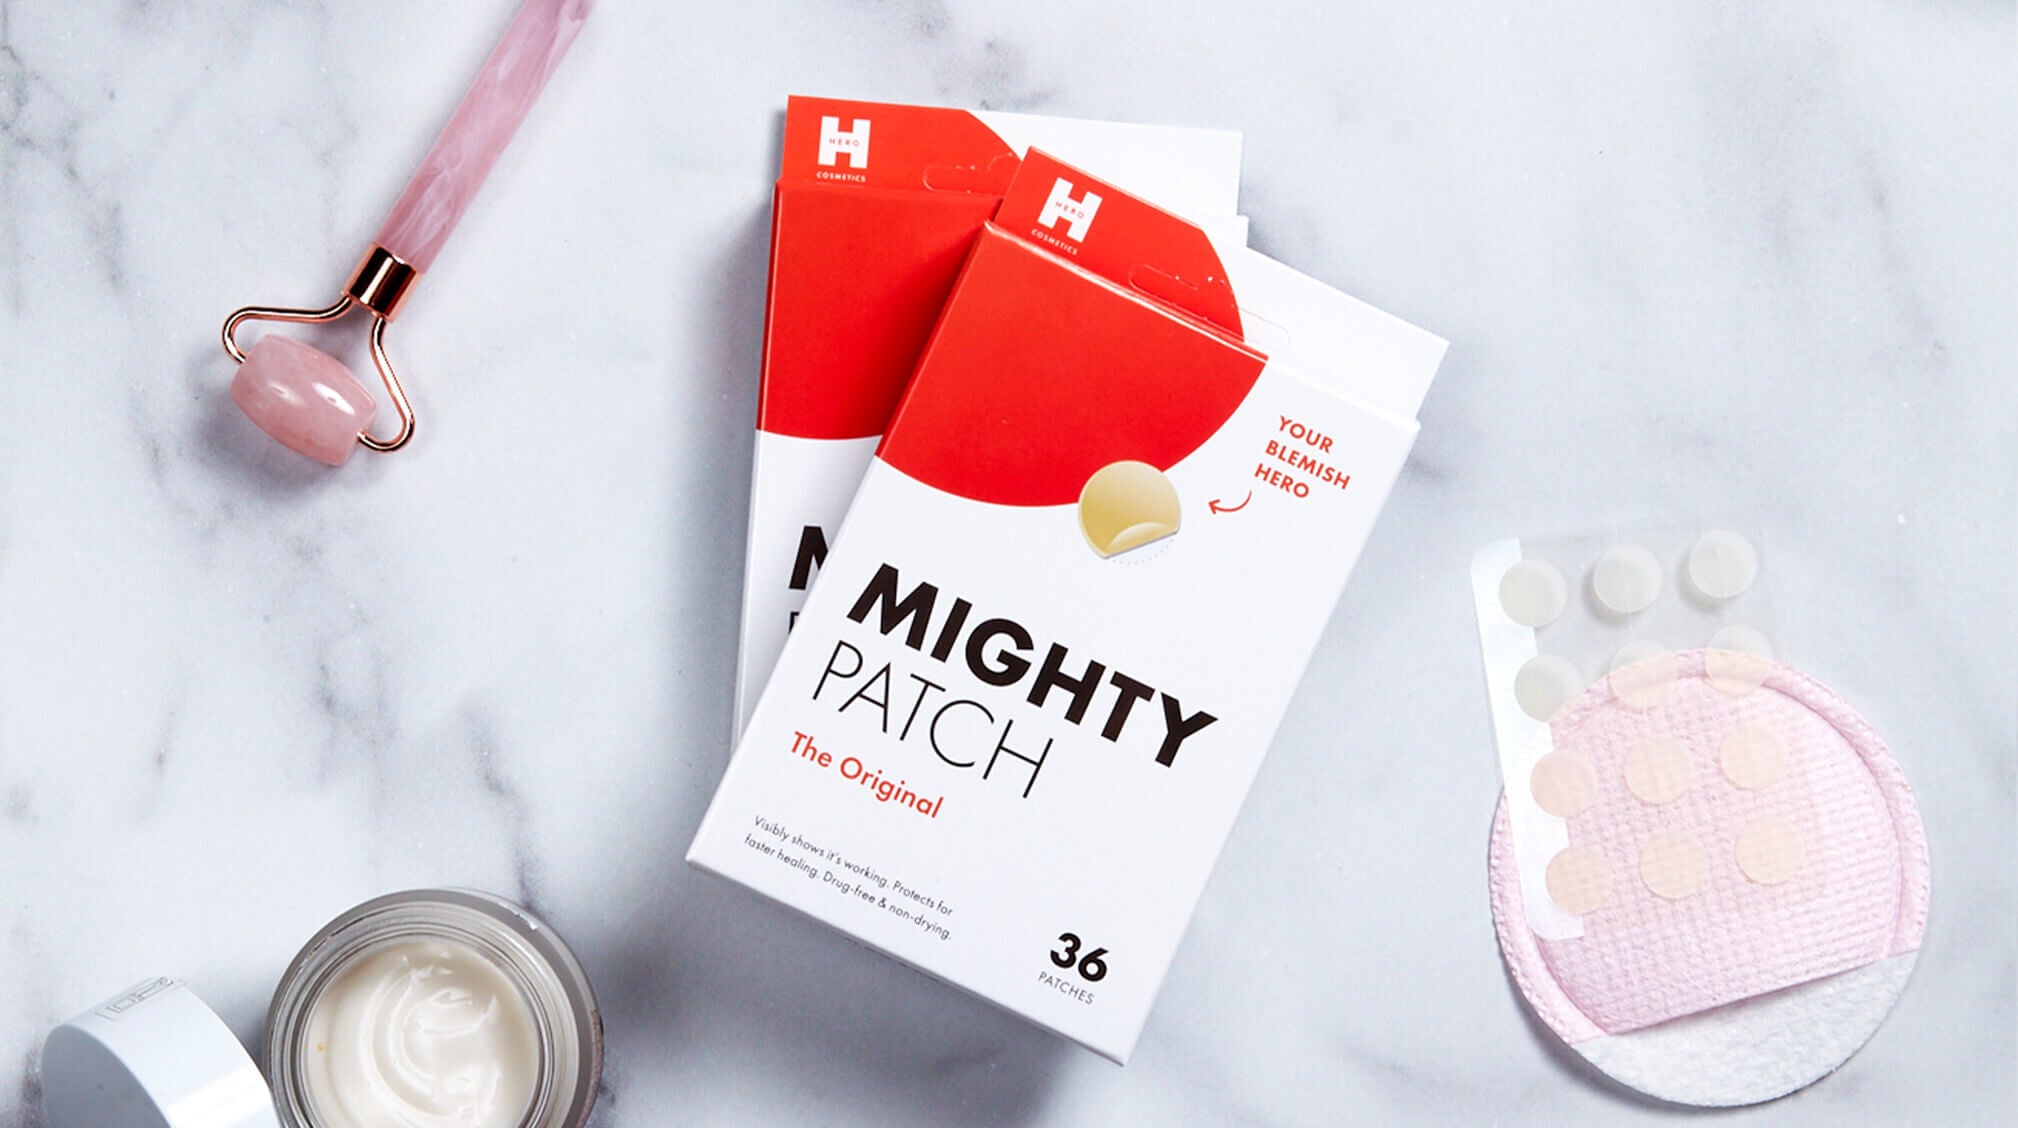 Mighty patch next to skincare products and tools